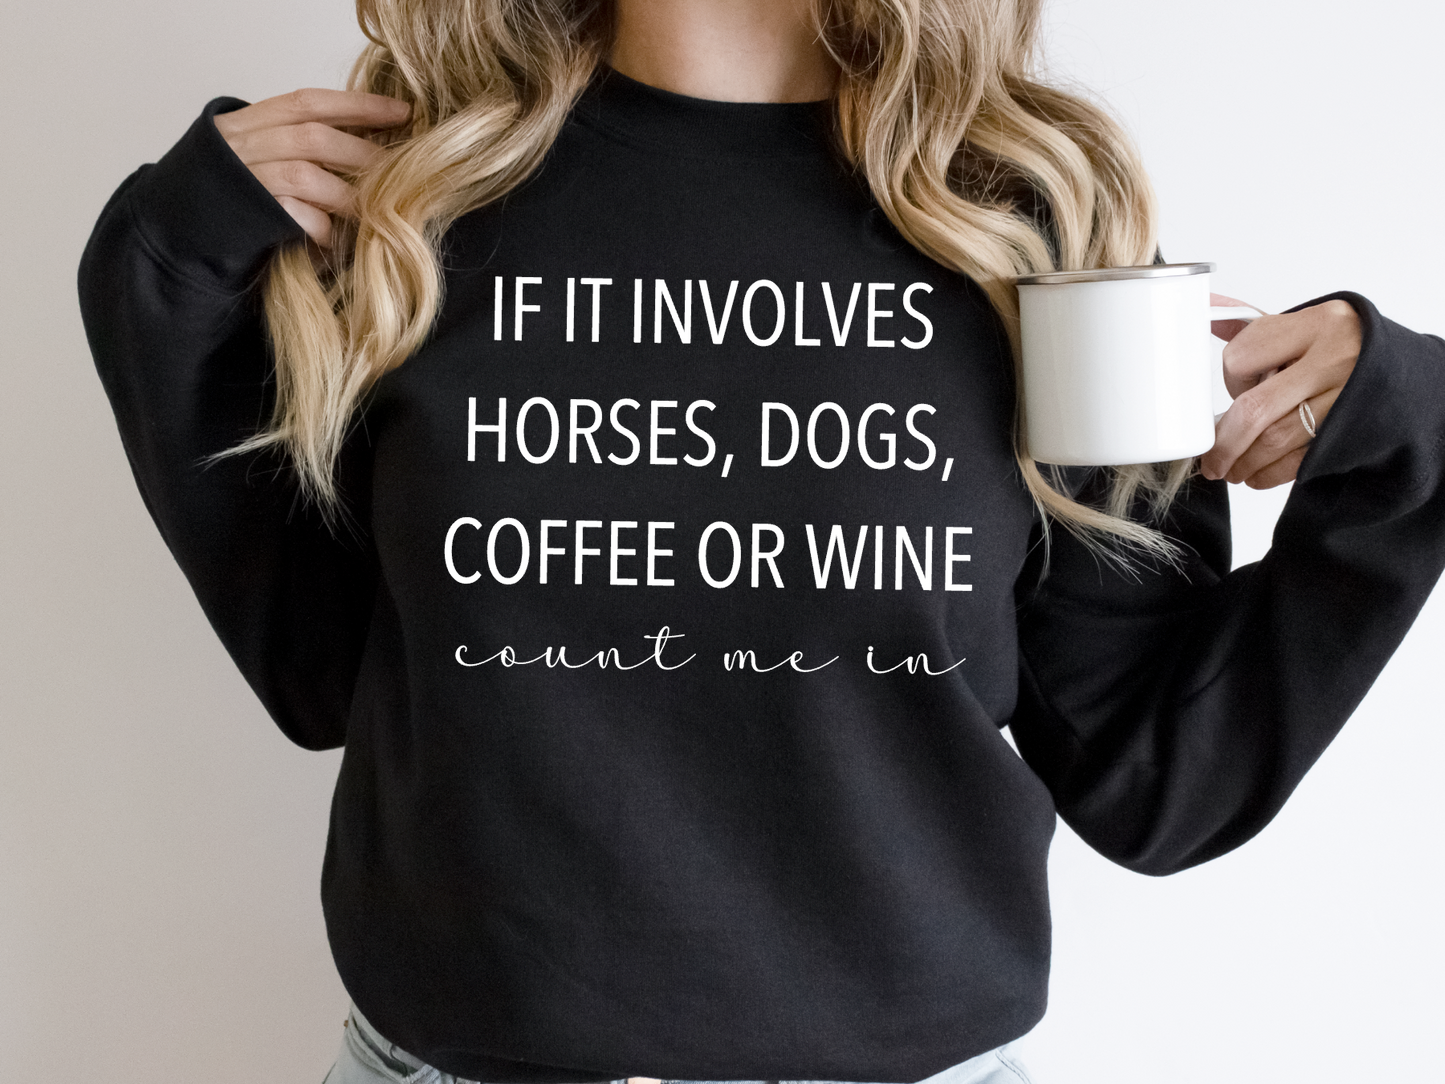 Horses, Dogs, Coffee or Wine